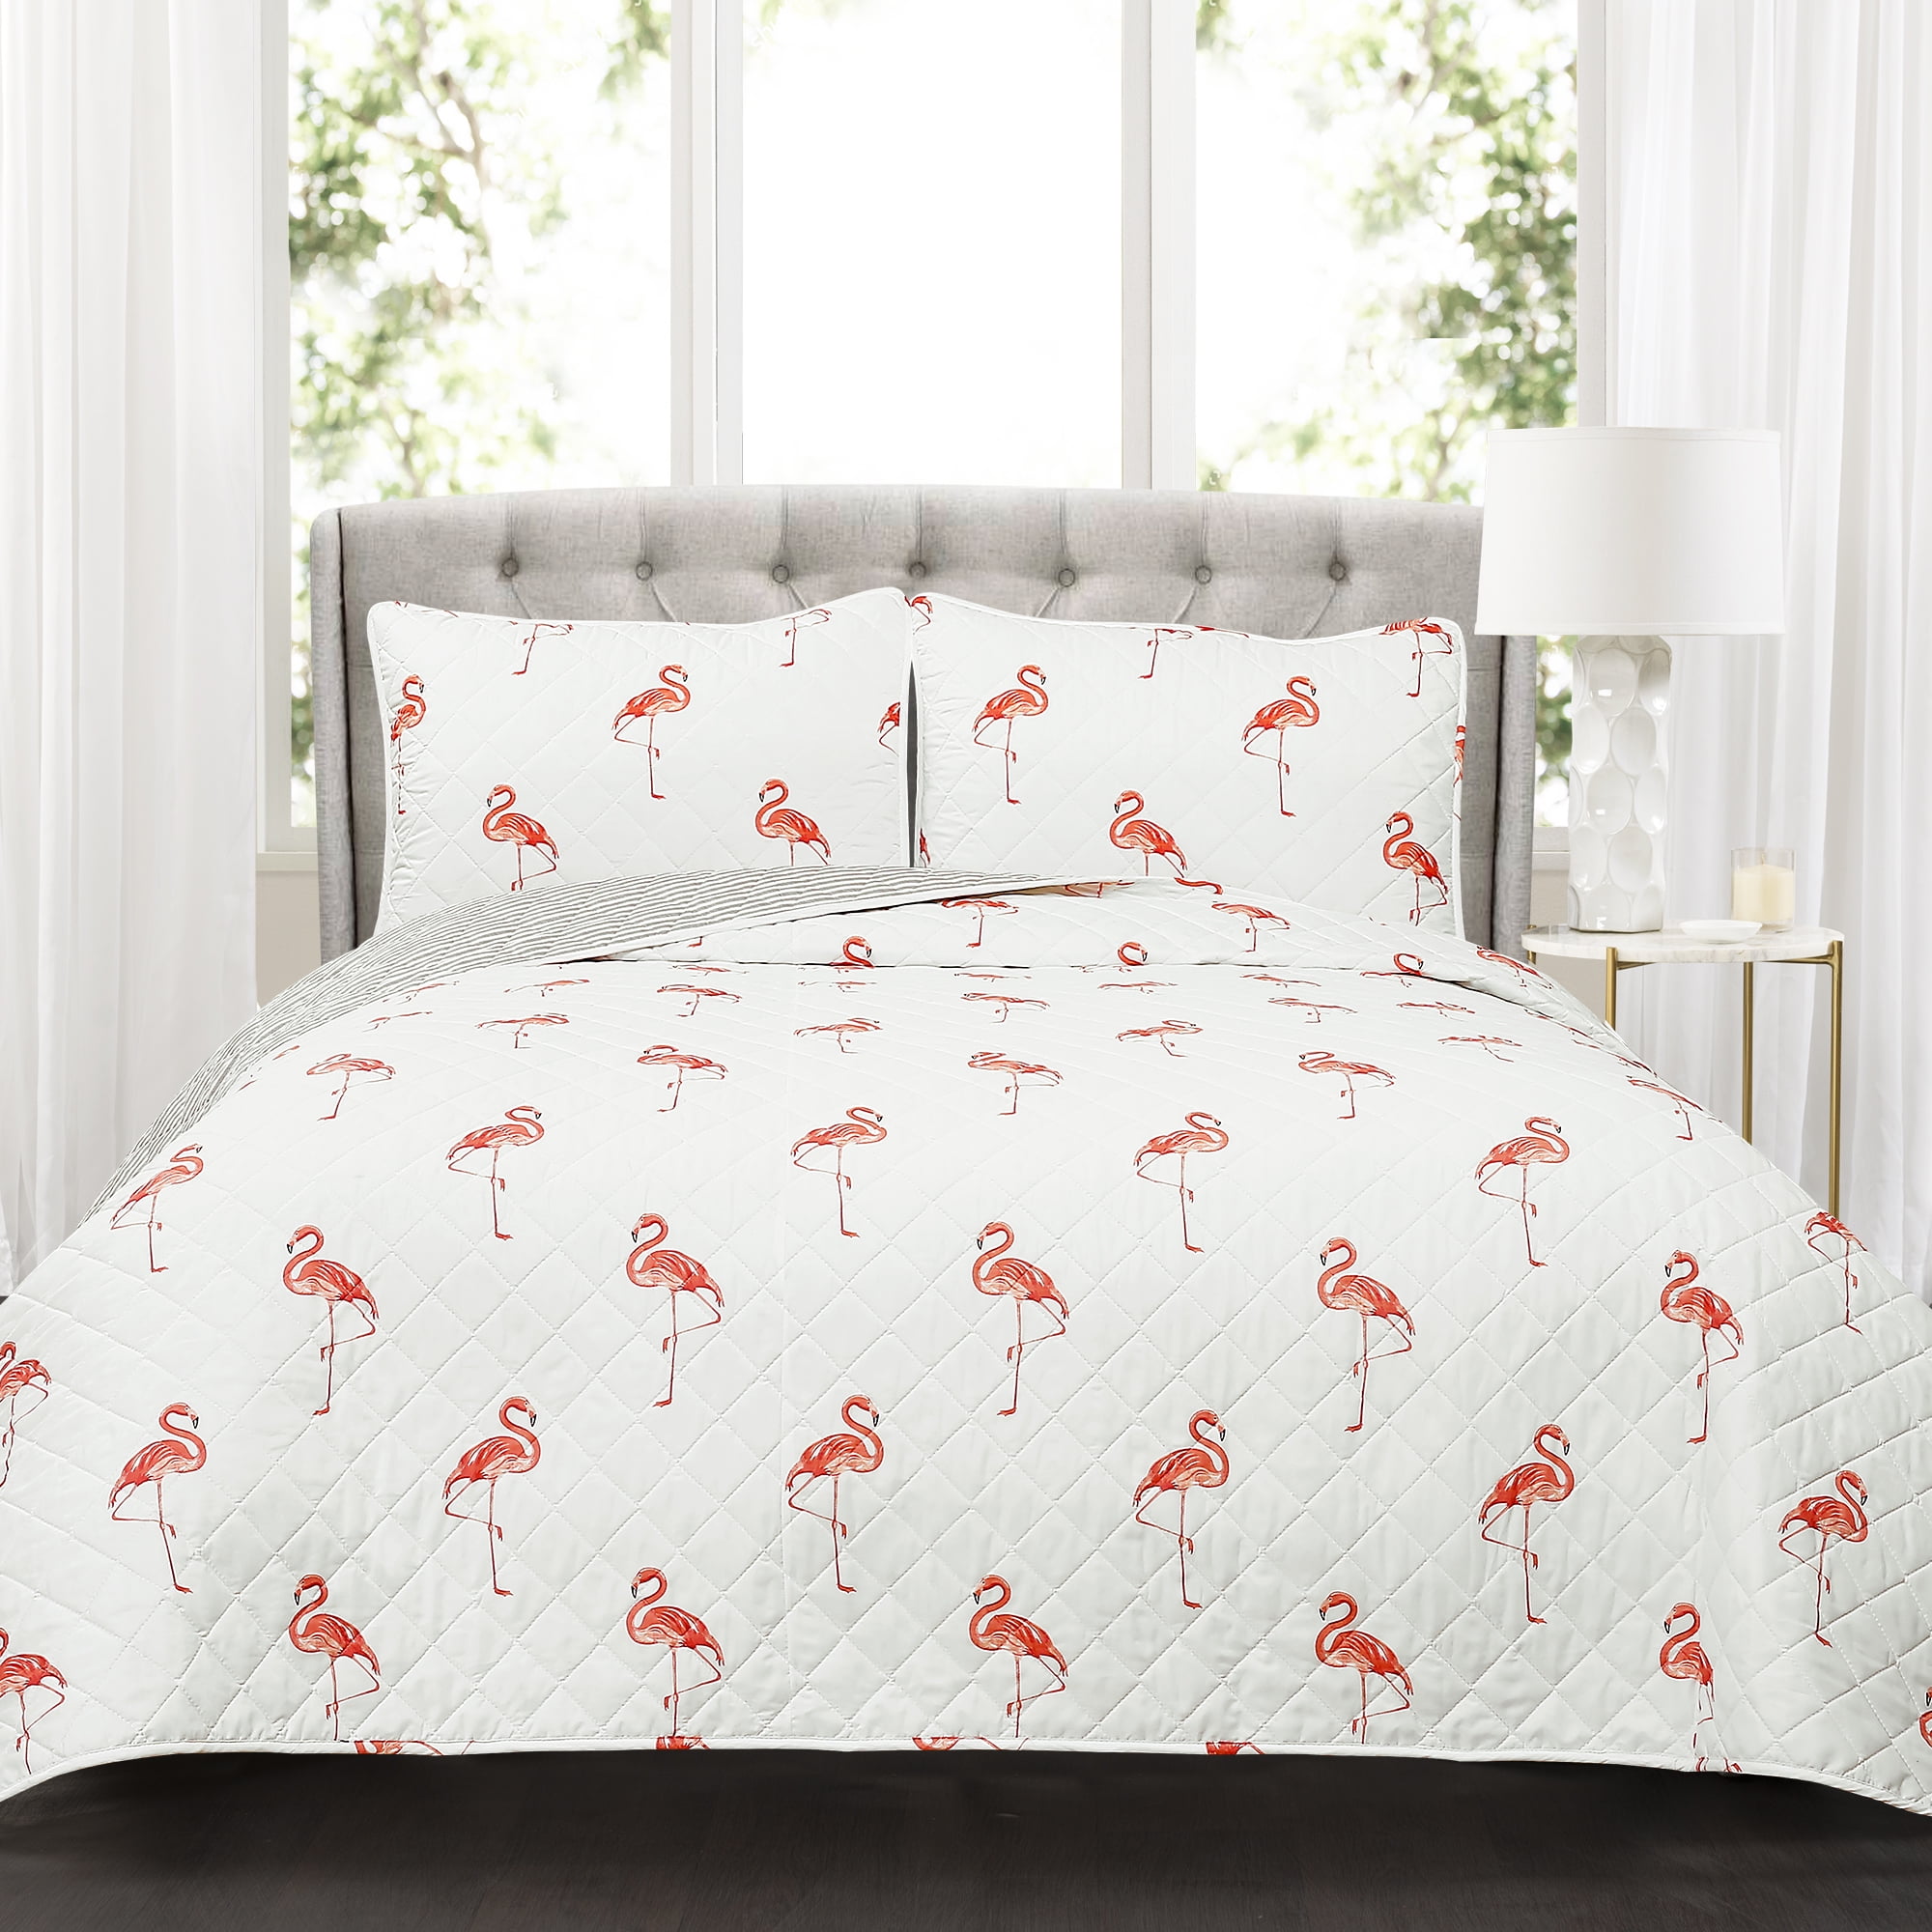 InterestPrint Tropical Flamingo Coverlet Quilt for All Season Warm Lightweight Quilted Throw 70x80 